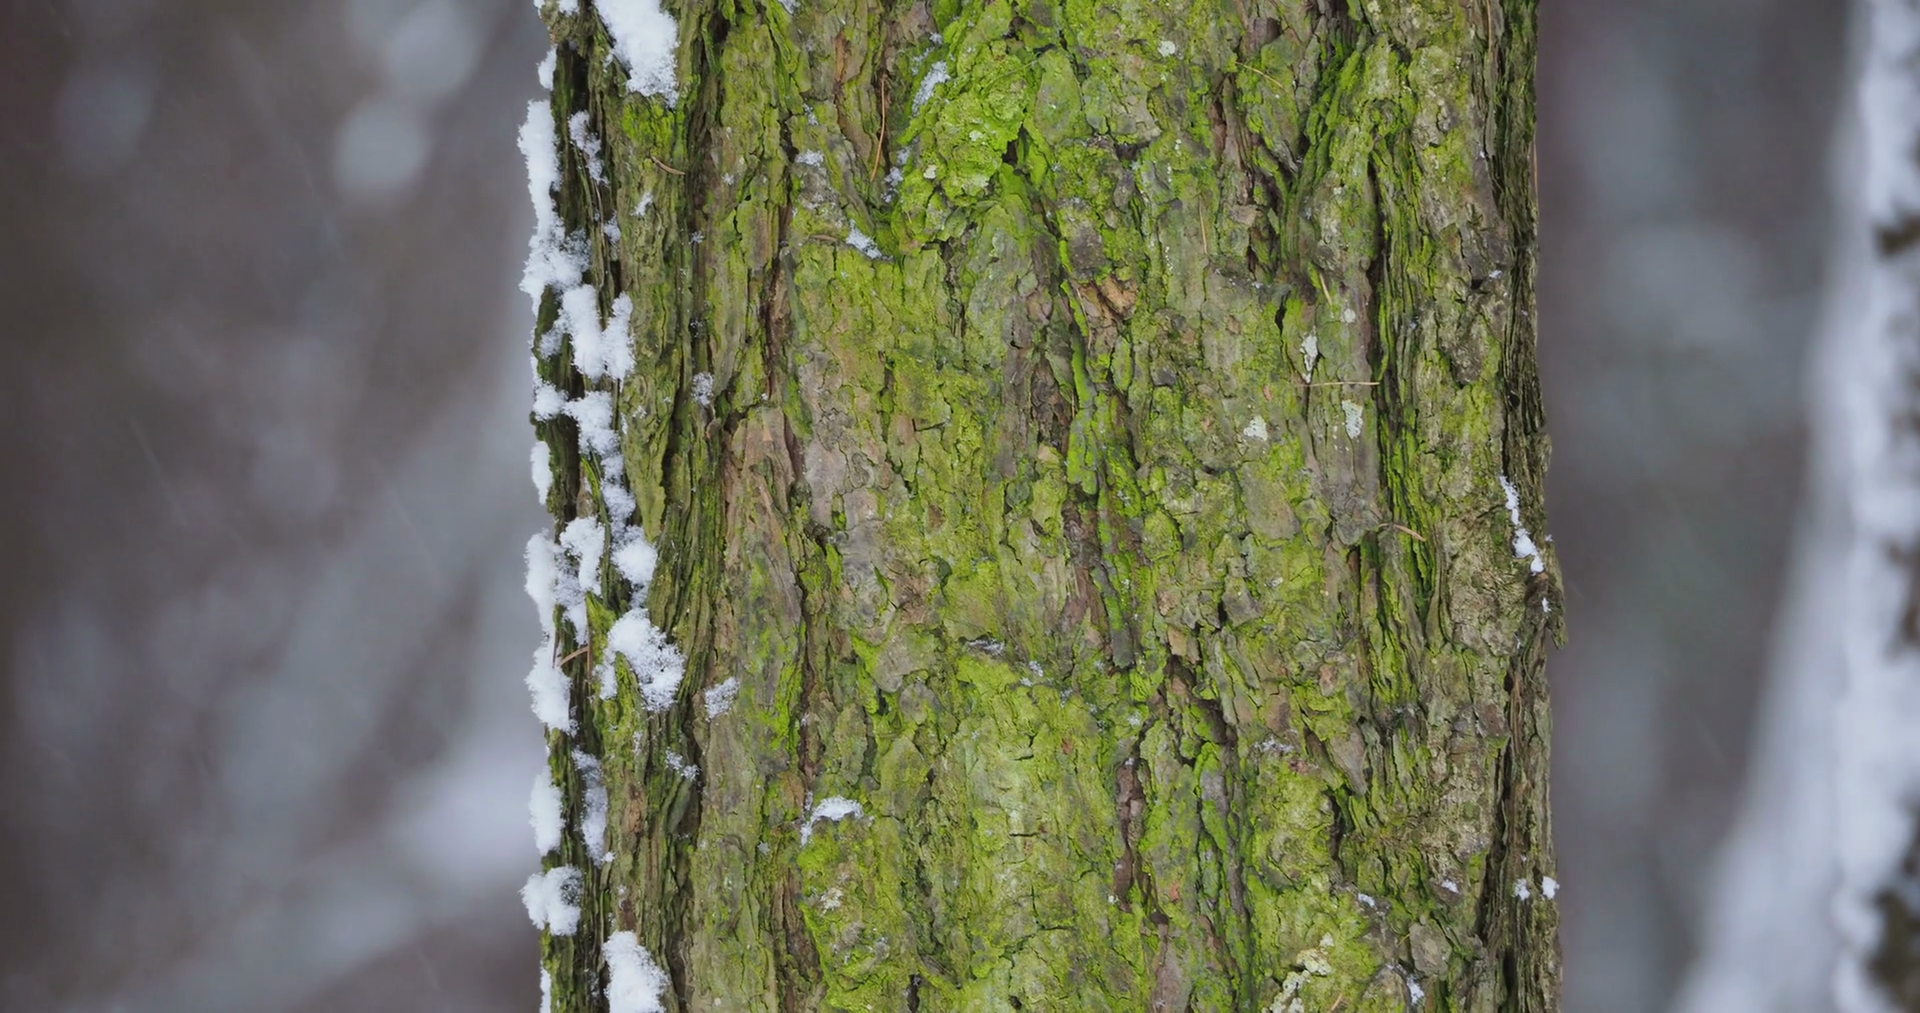 Heavy snowfall in forest. Focus on tree bark with green moss. Winter ...